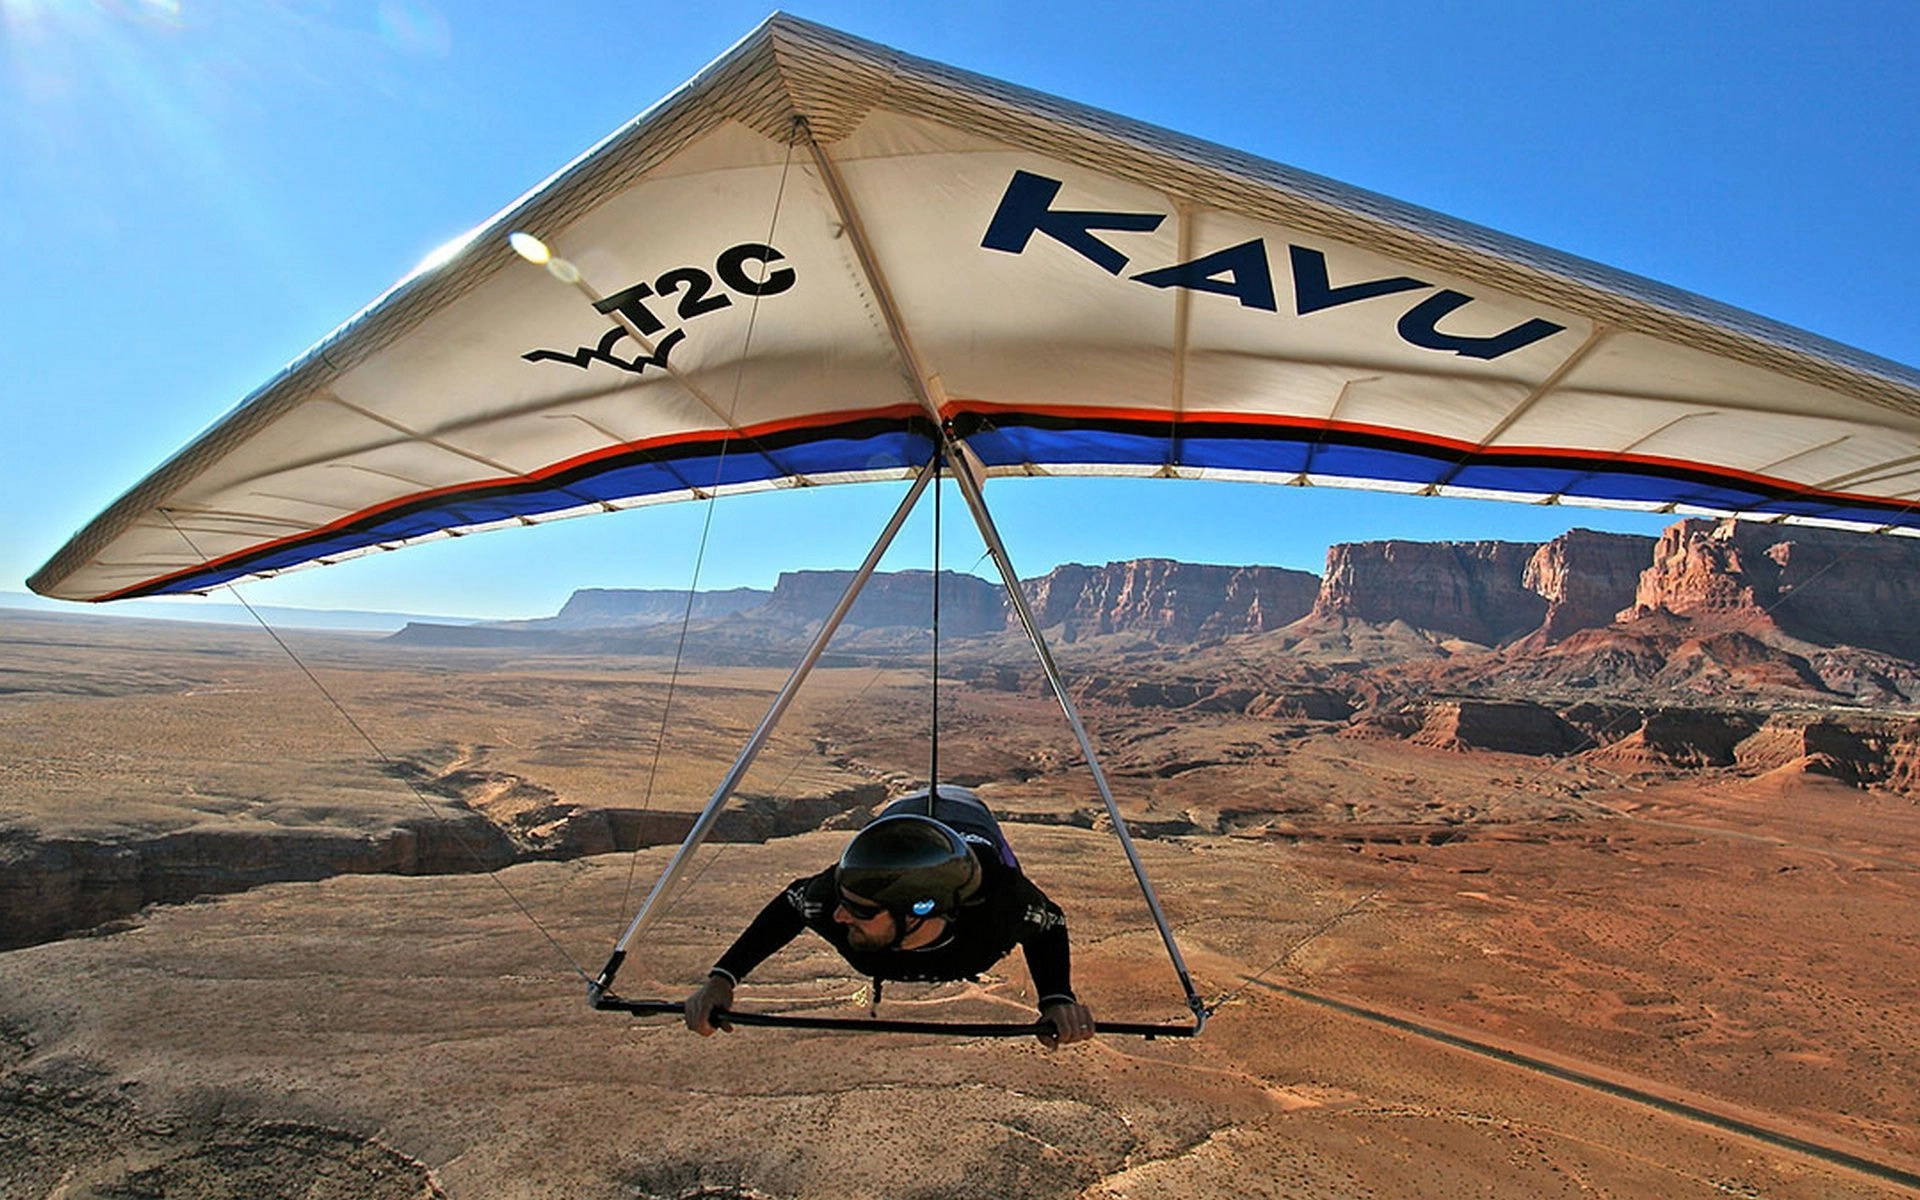 Hang Gliding: Hang glider weight: 31 kg, T2C, Wills Wing, Air sport. 1920x1200 HD Background.